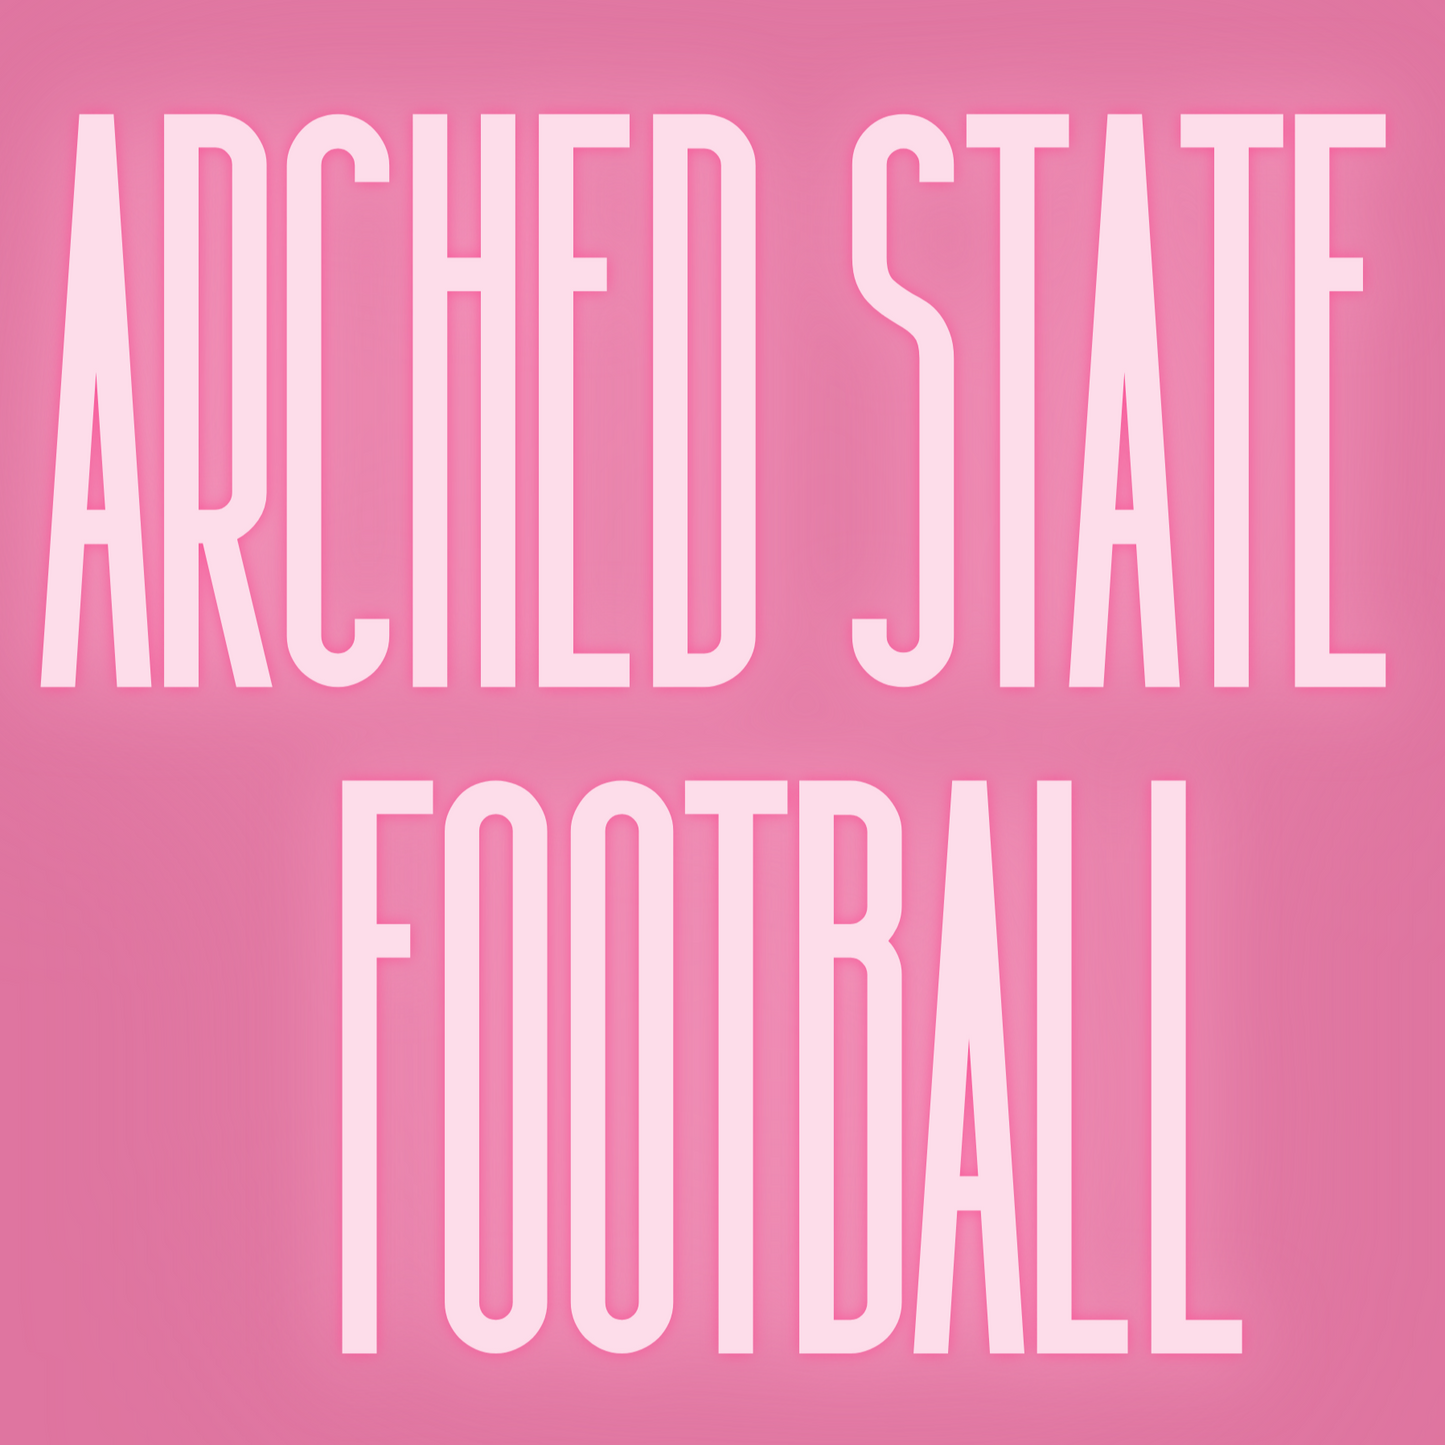 Arched State Football - WS